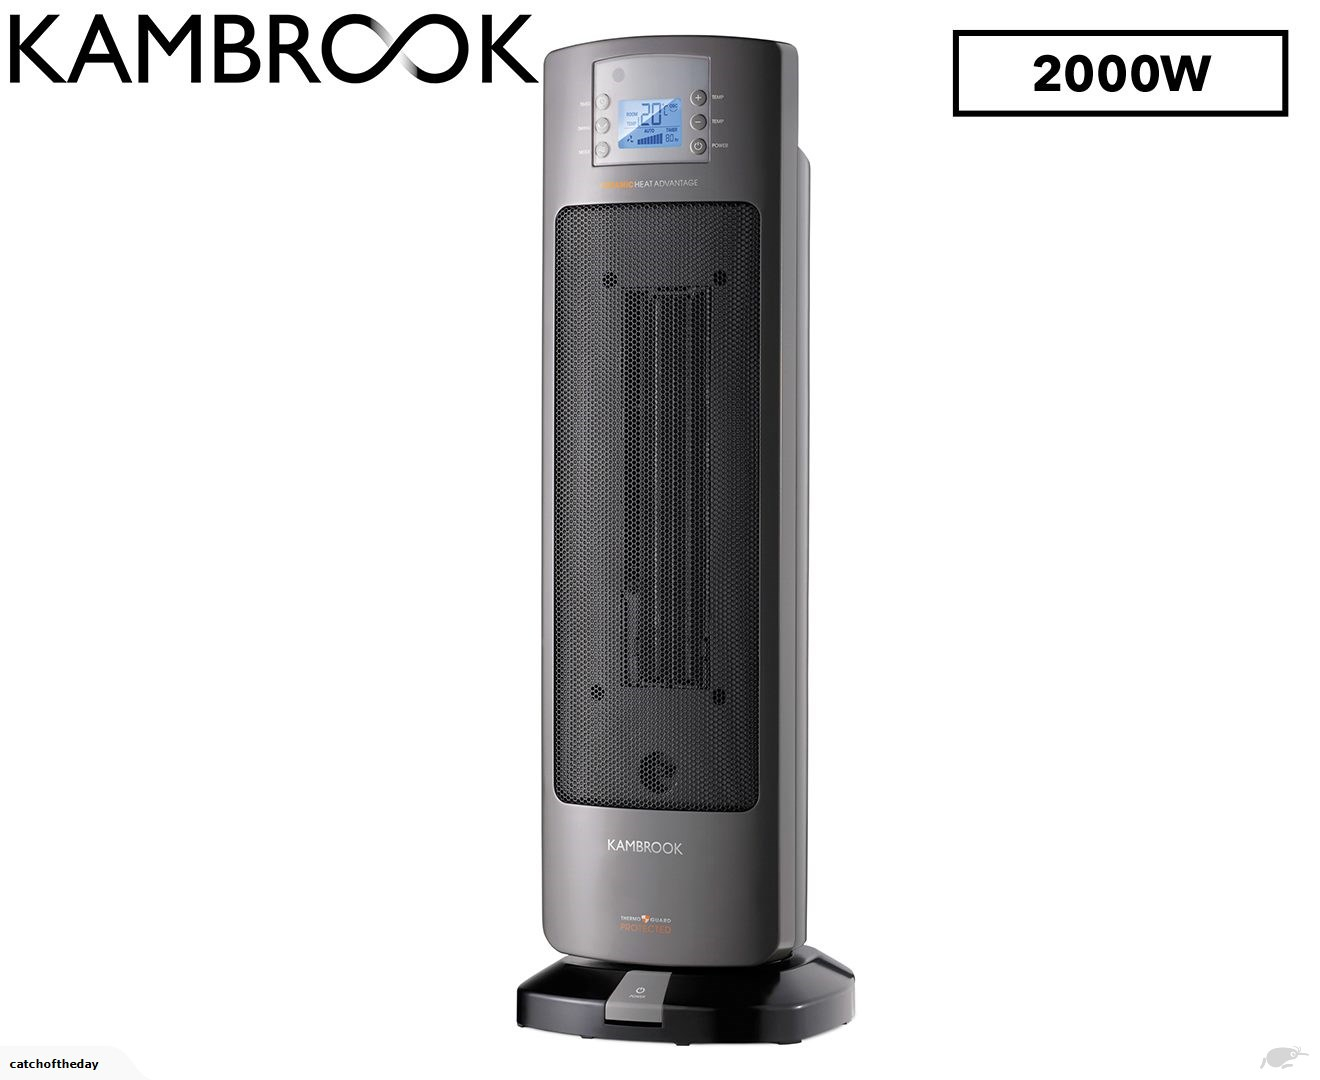 Kambrook 2000w Ceramic Tower Heater In Black Portable Heater in dimensions 1320 X 1080